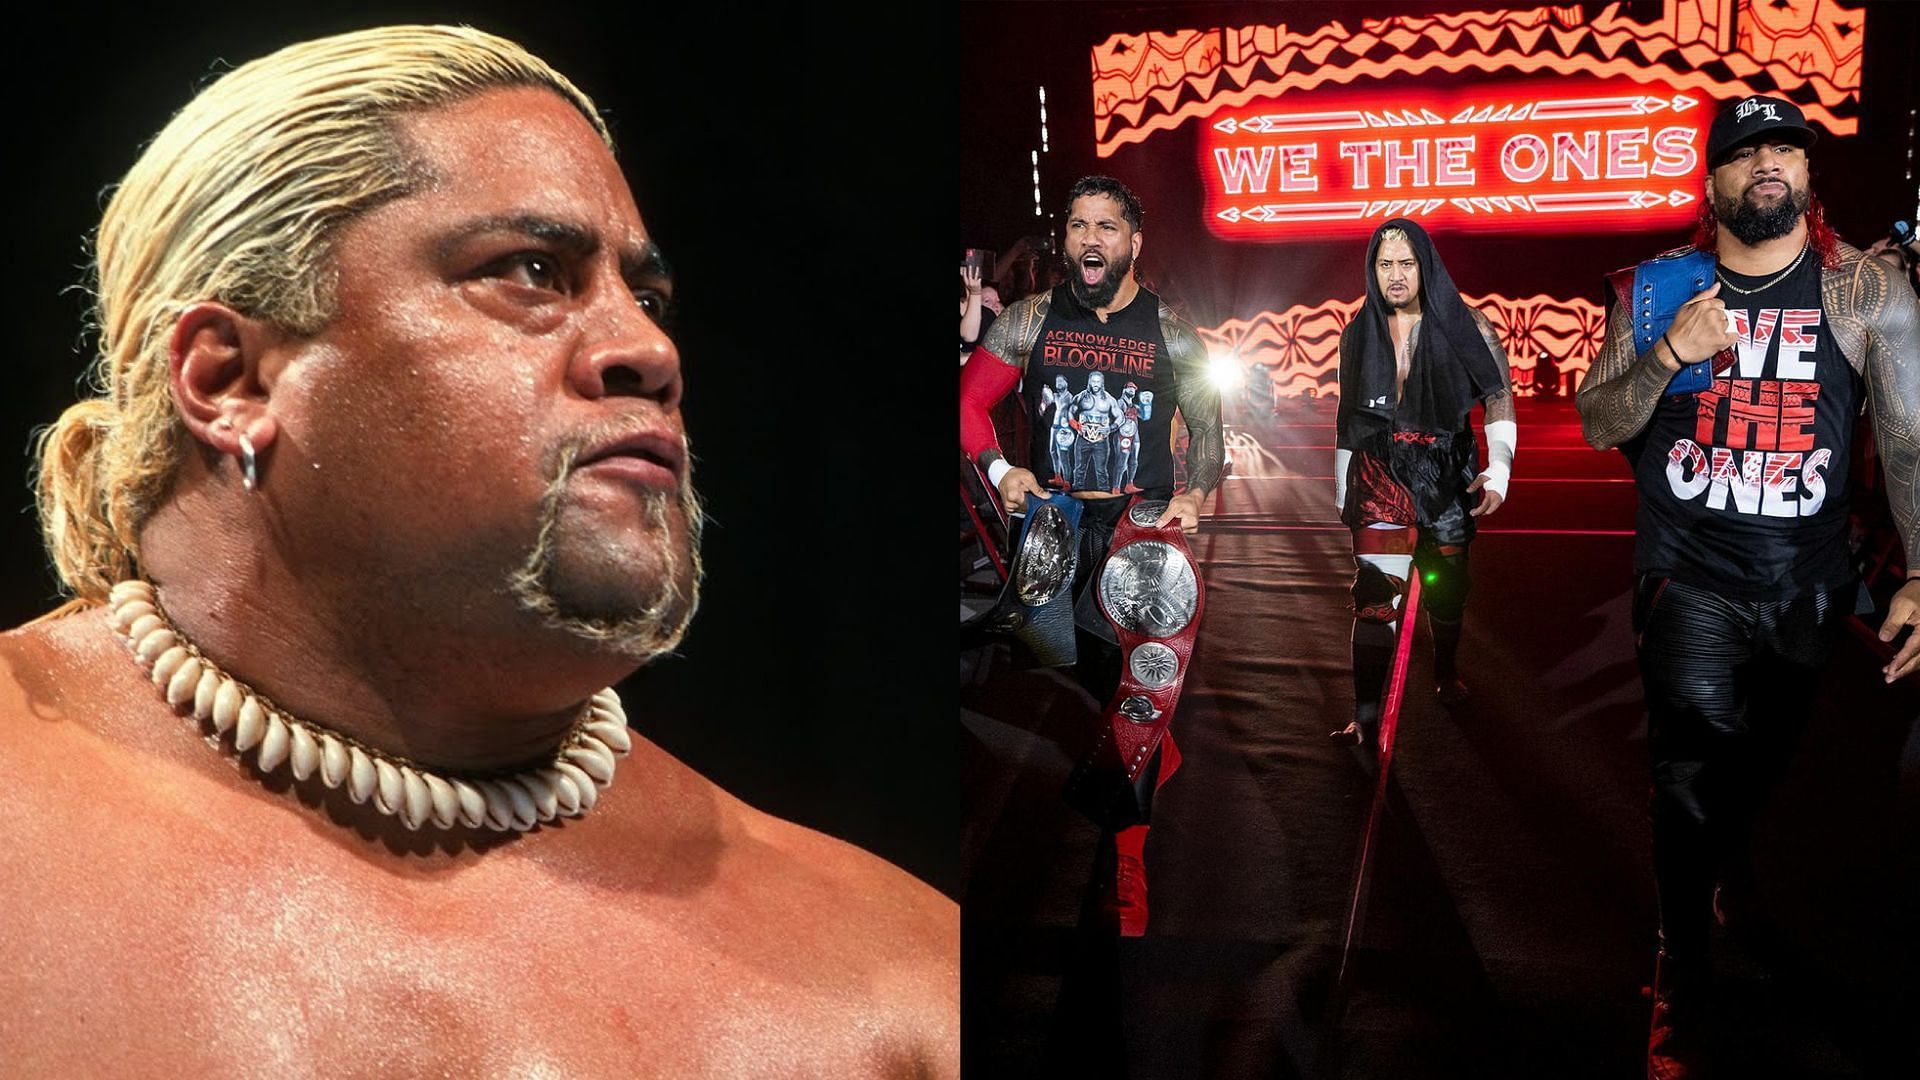 Rikishi sent a message on behalf of his family 